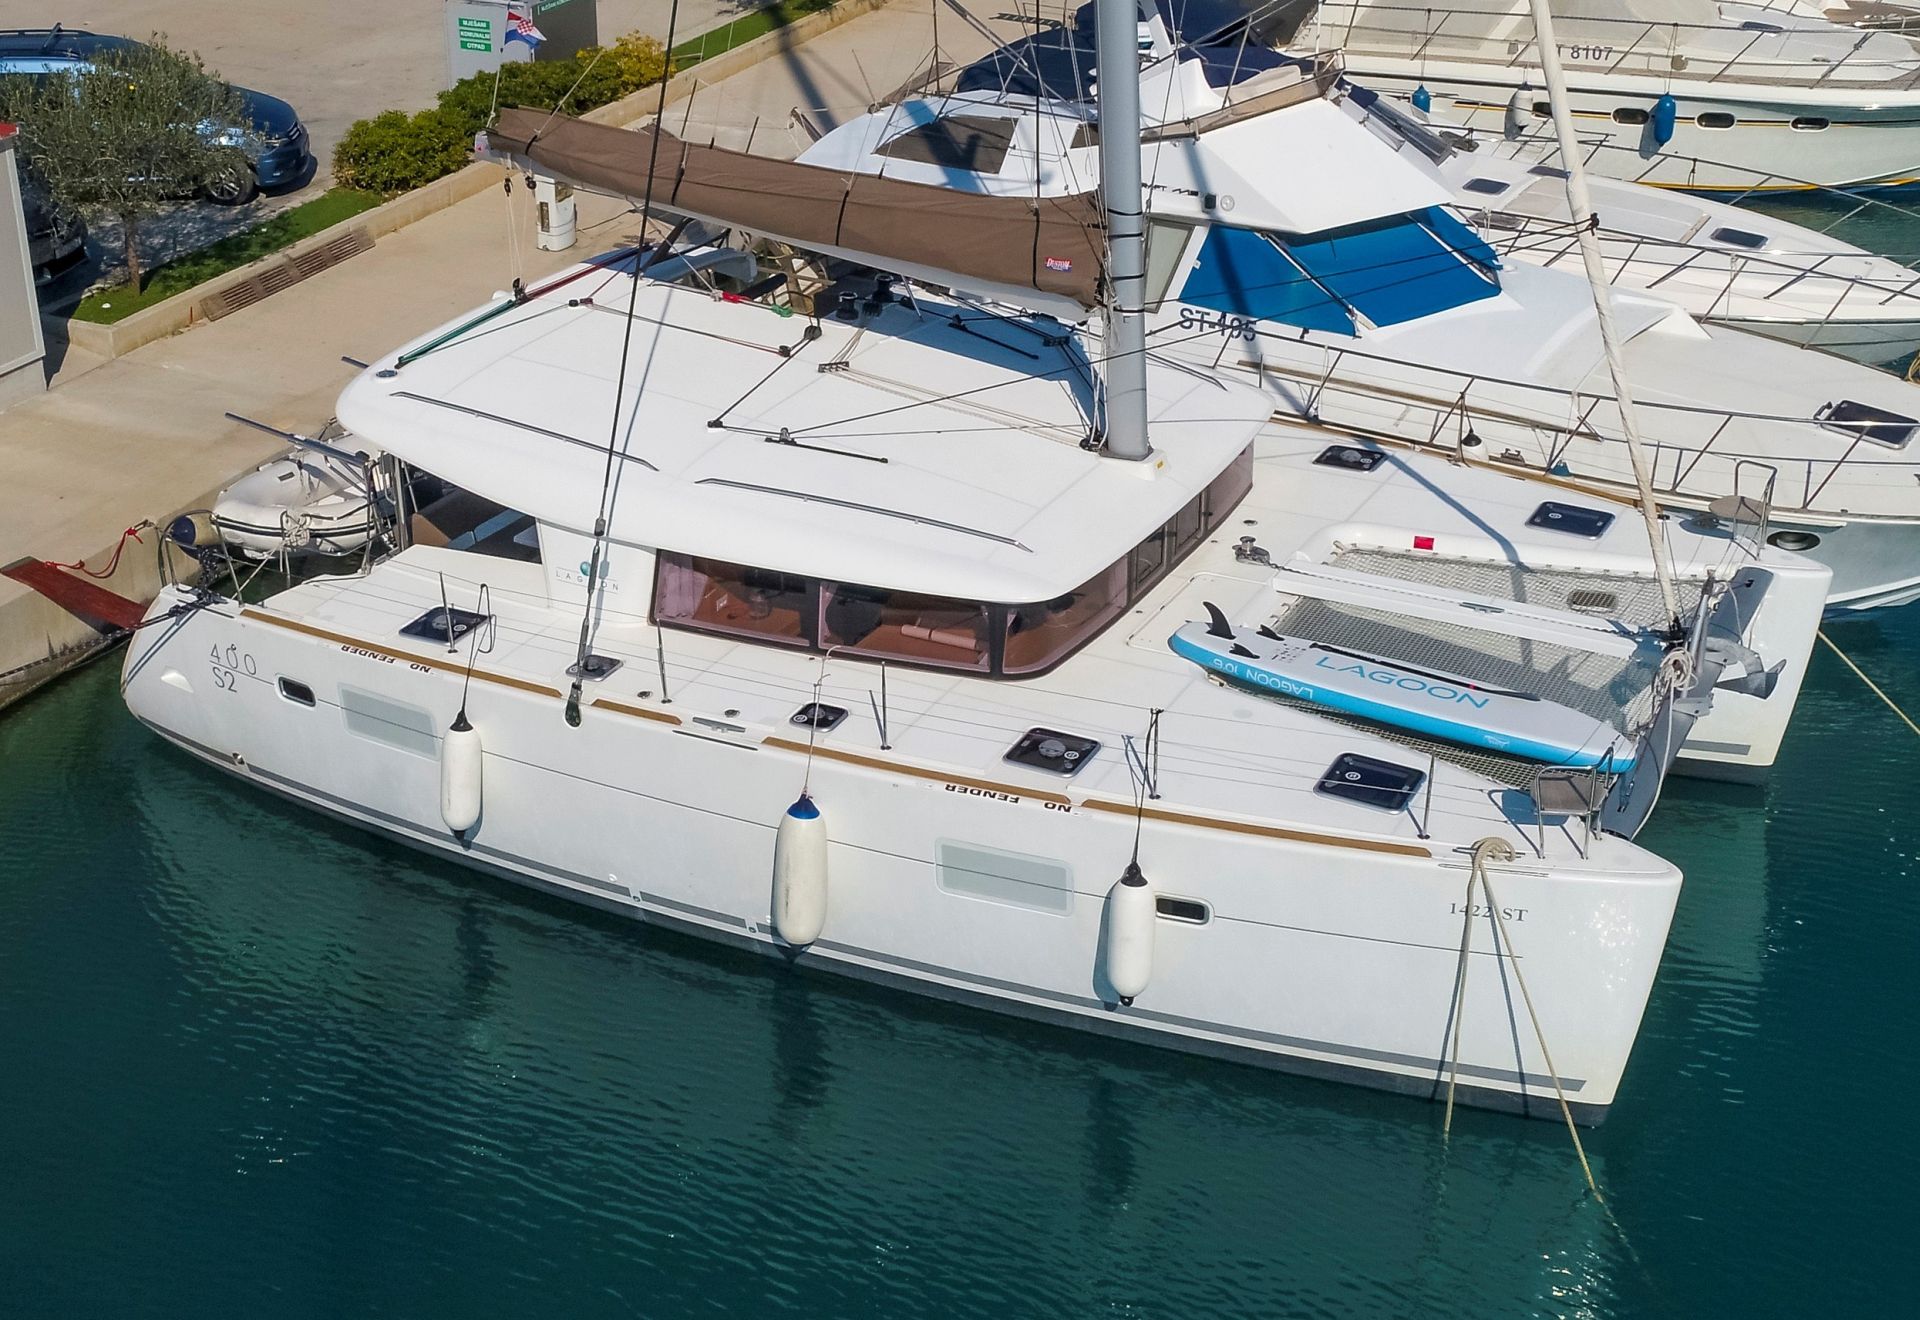 Lagoon 400S2 Second Wind from the air parked in marina